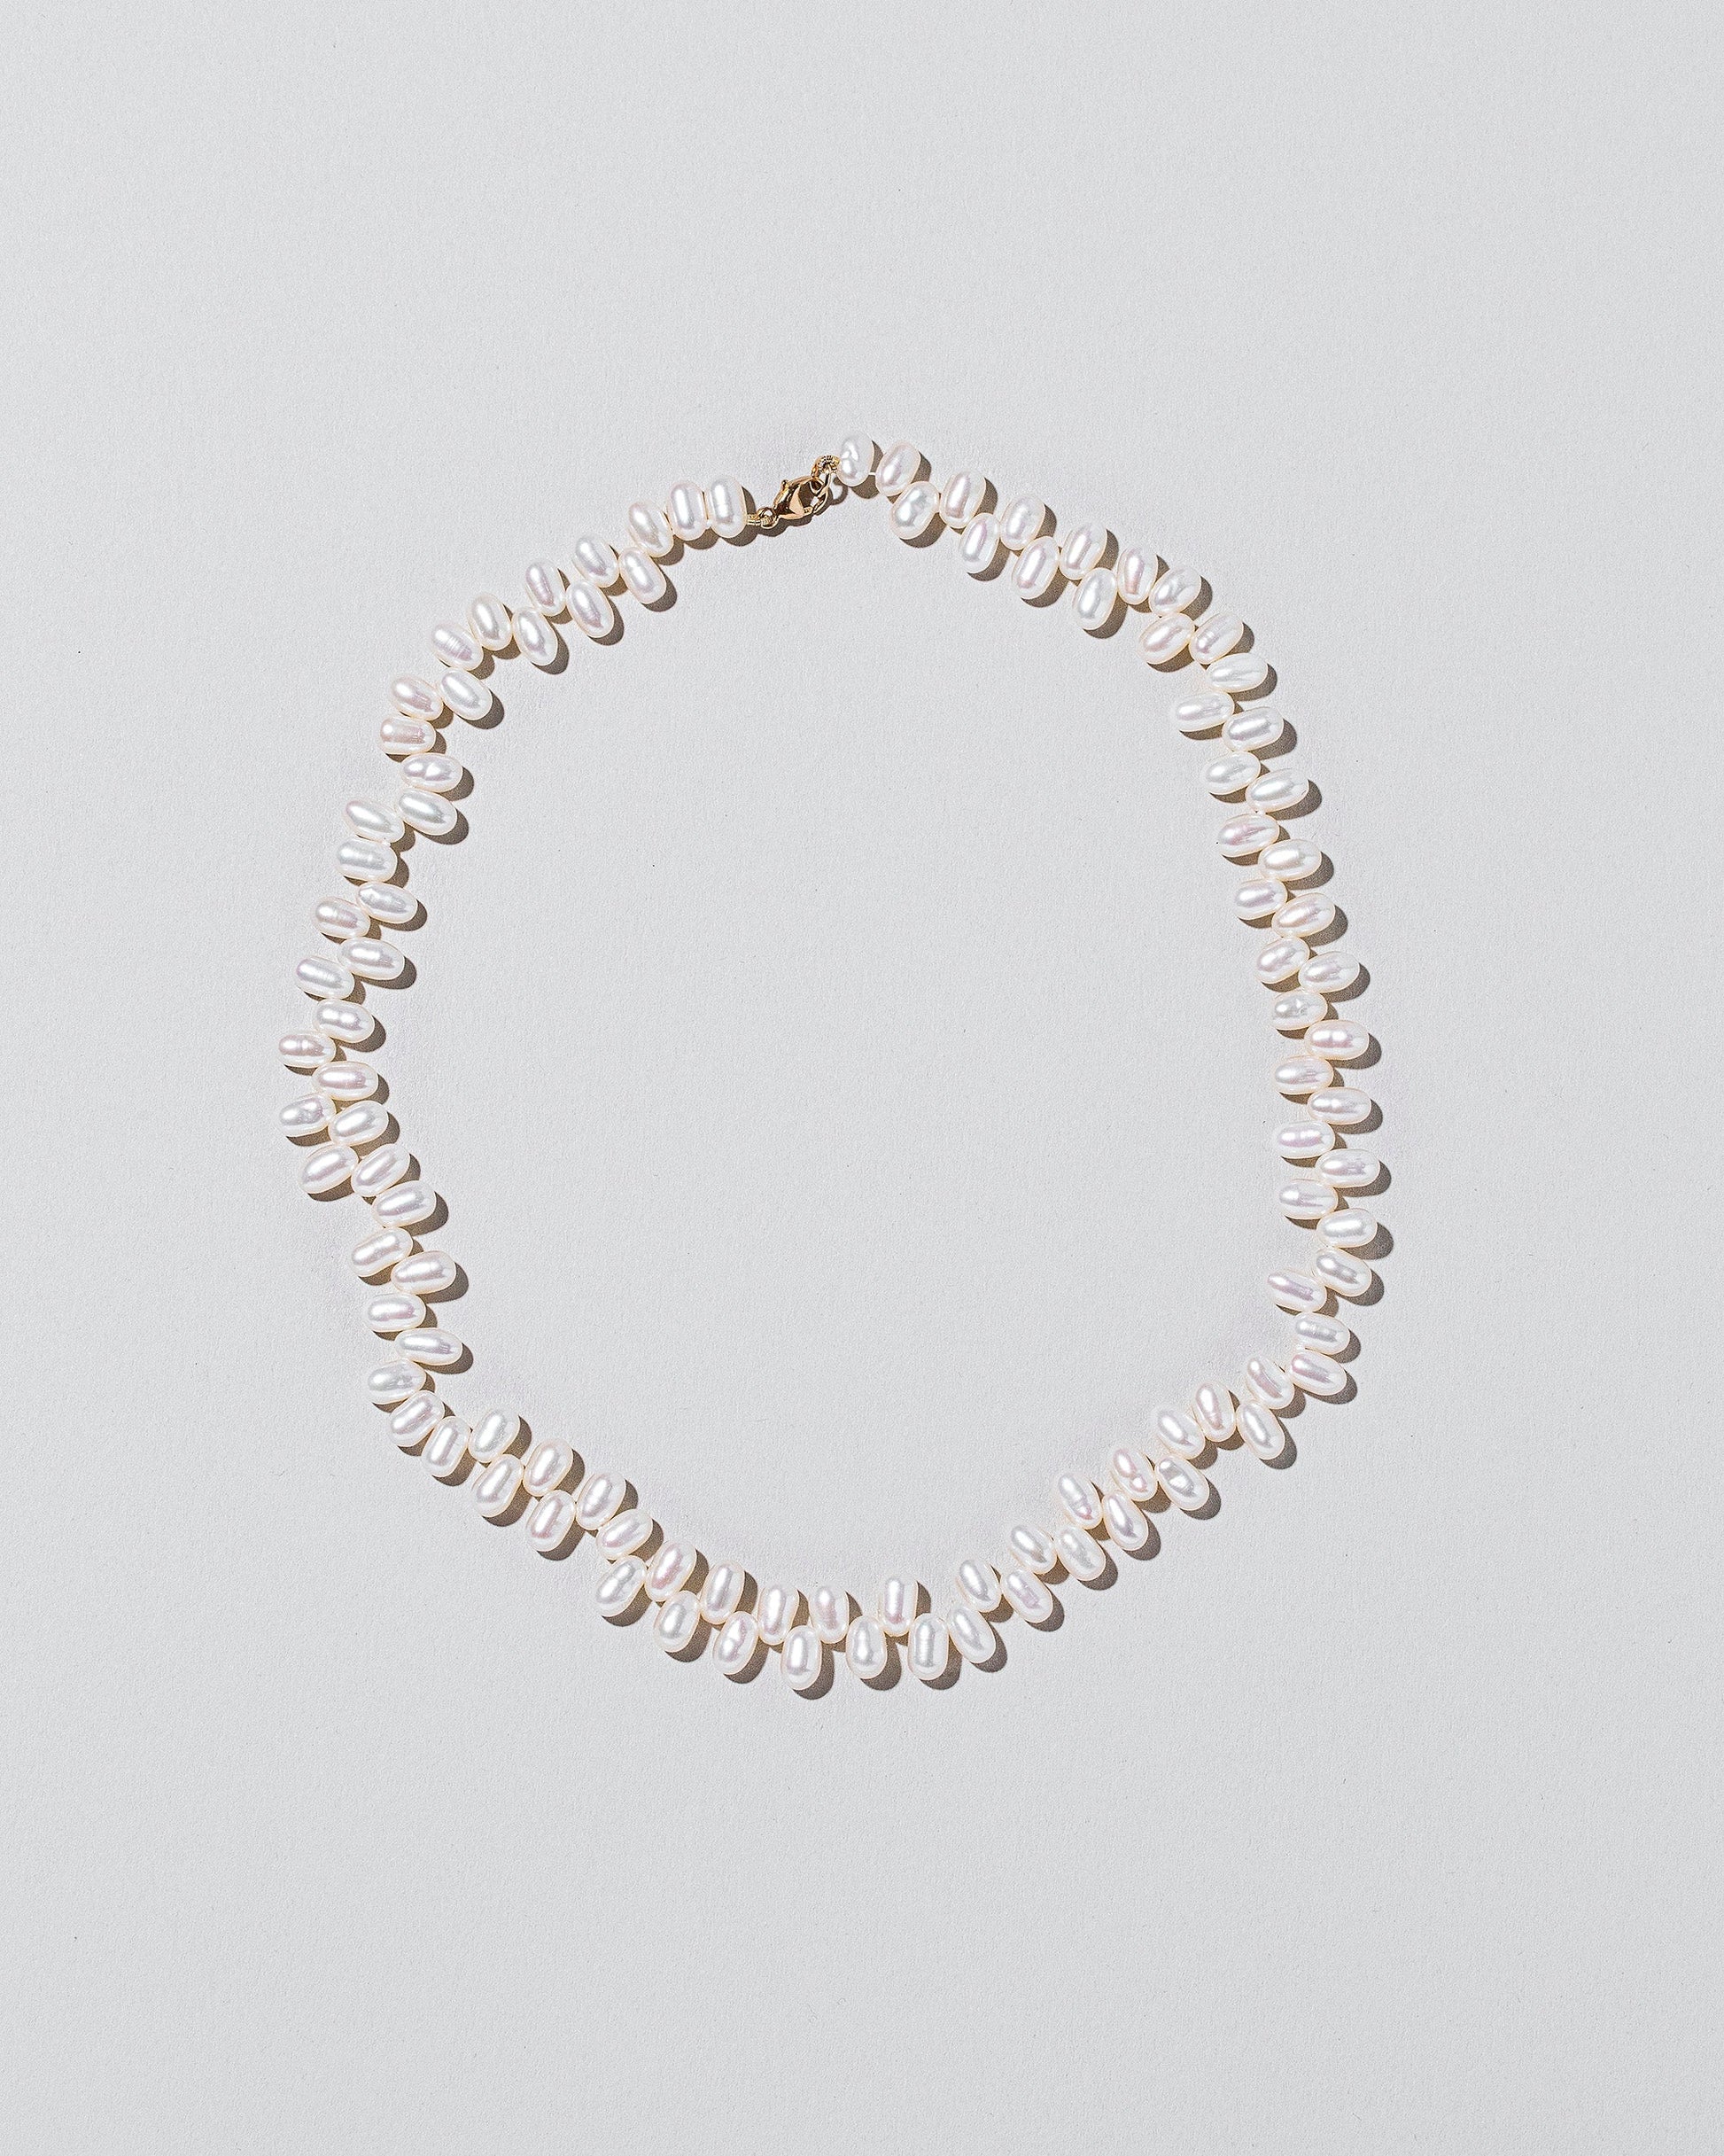 Large Zipper Pearl Necklace on light color background.